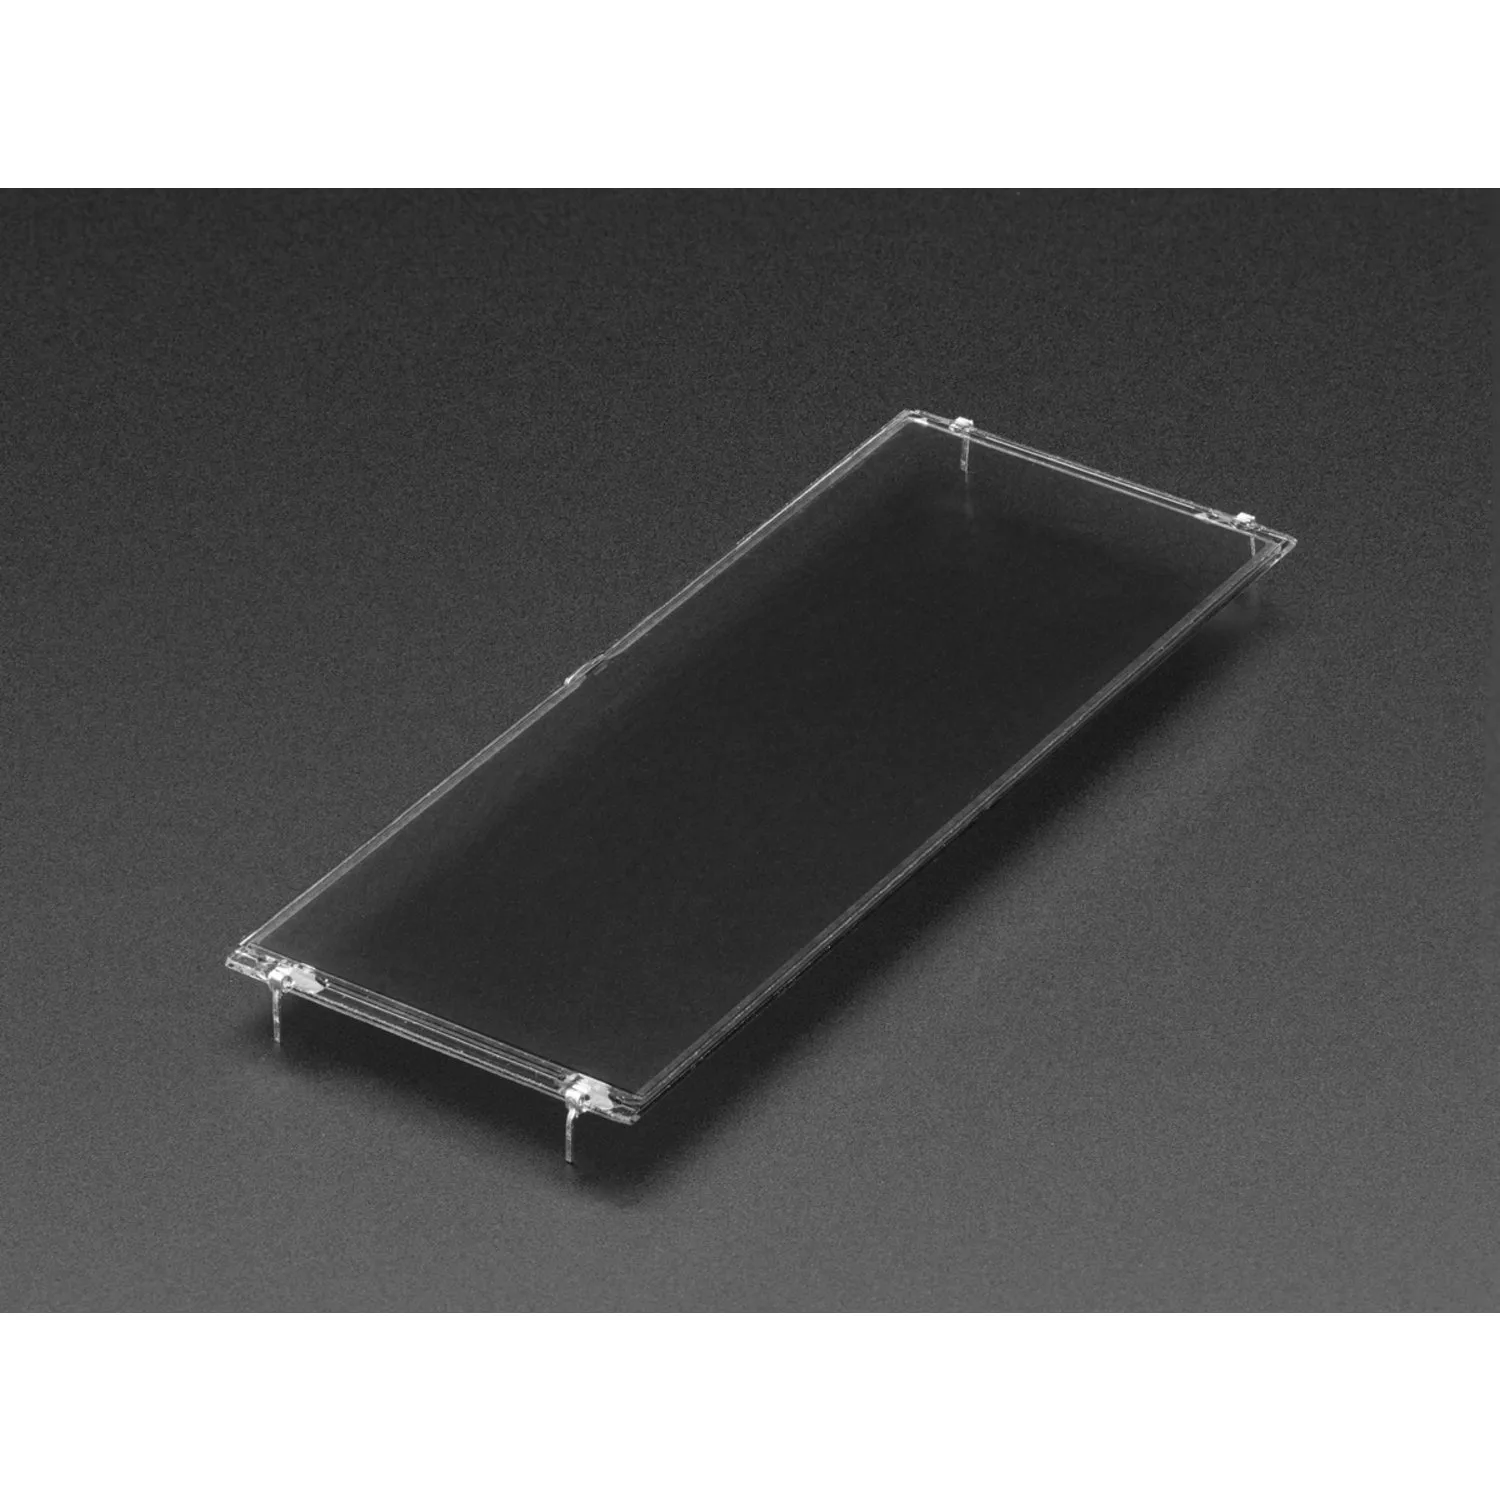 Photo of Liquid Crystal Light Valve - LCD Controllable Black-out Panel